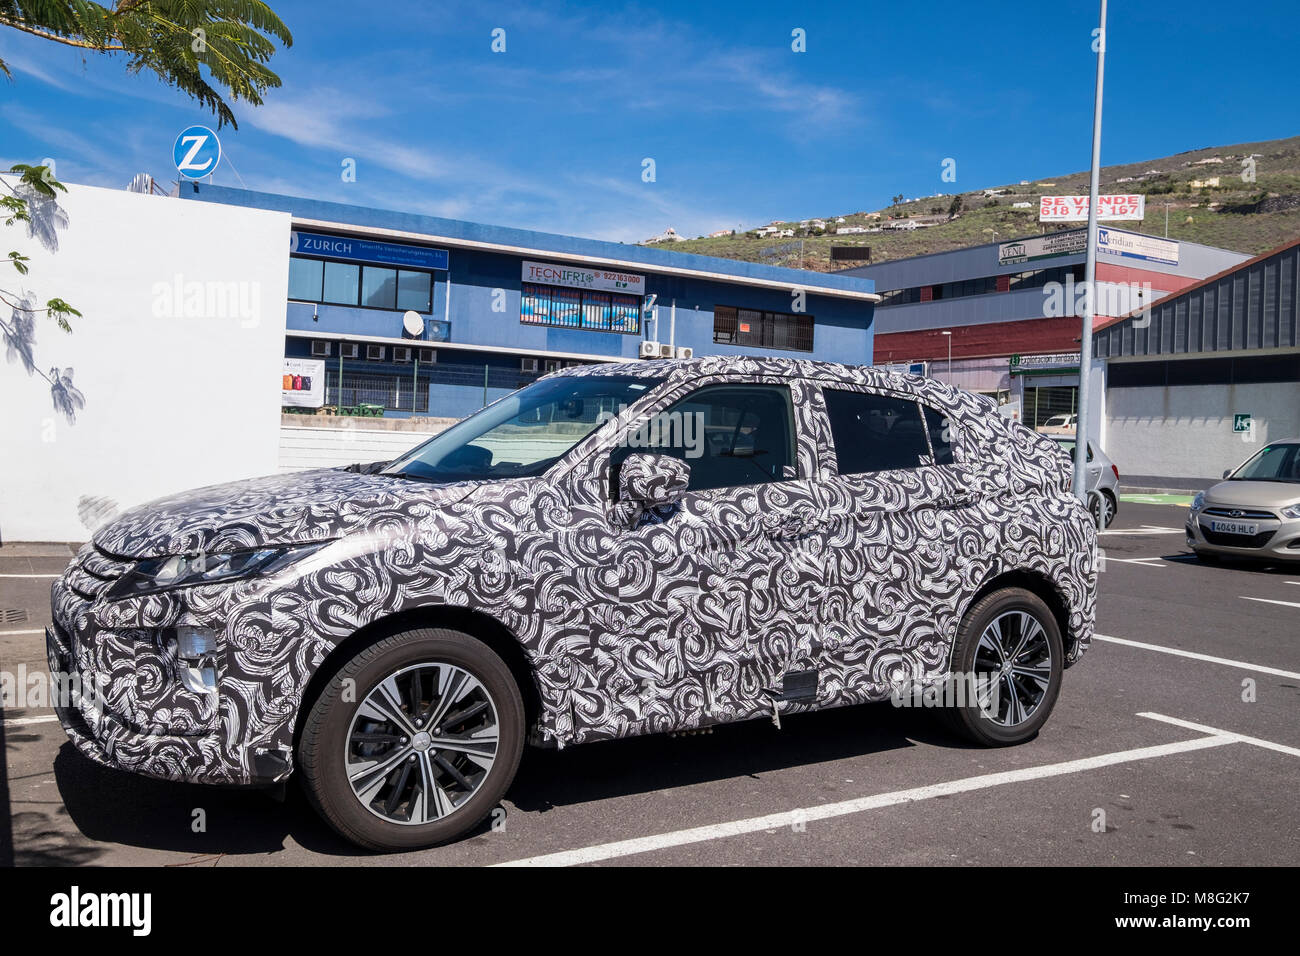 Mitsubishi Eclipse Cross SUV in confusing camoflauge wrap Stock Photo